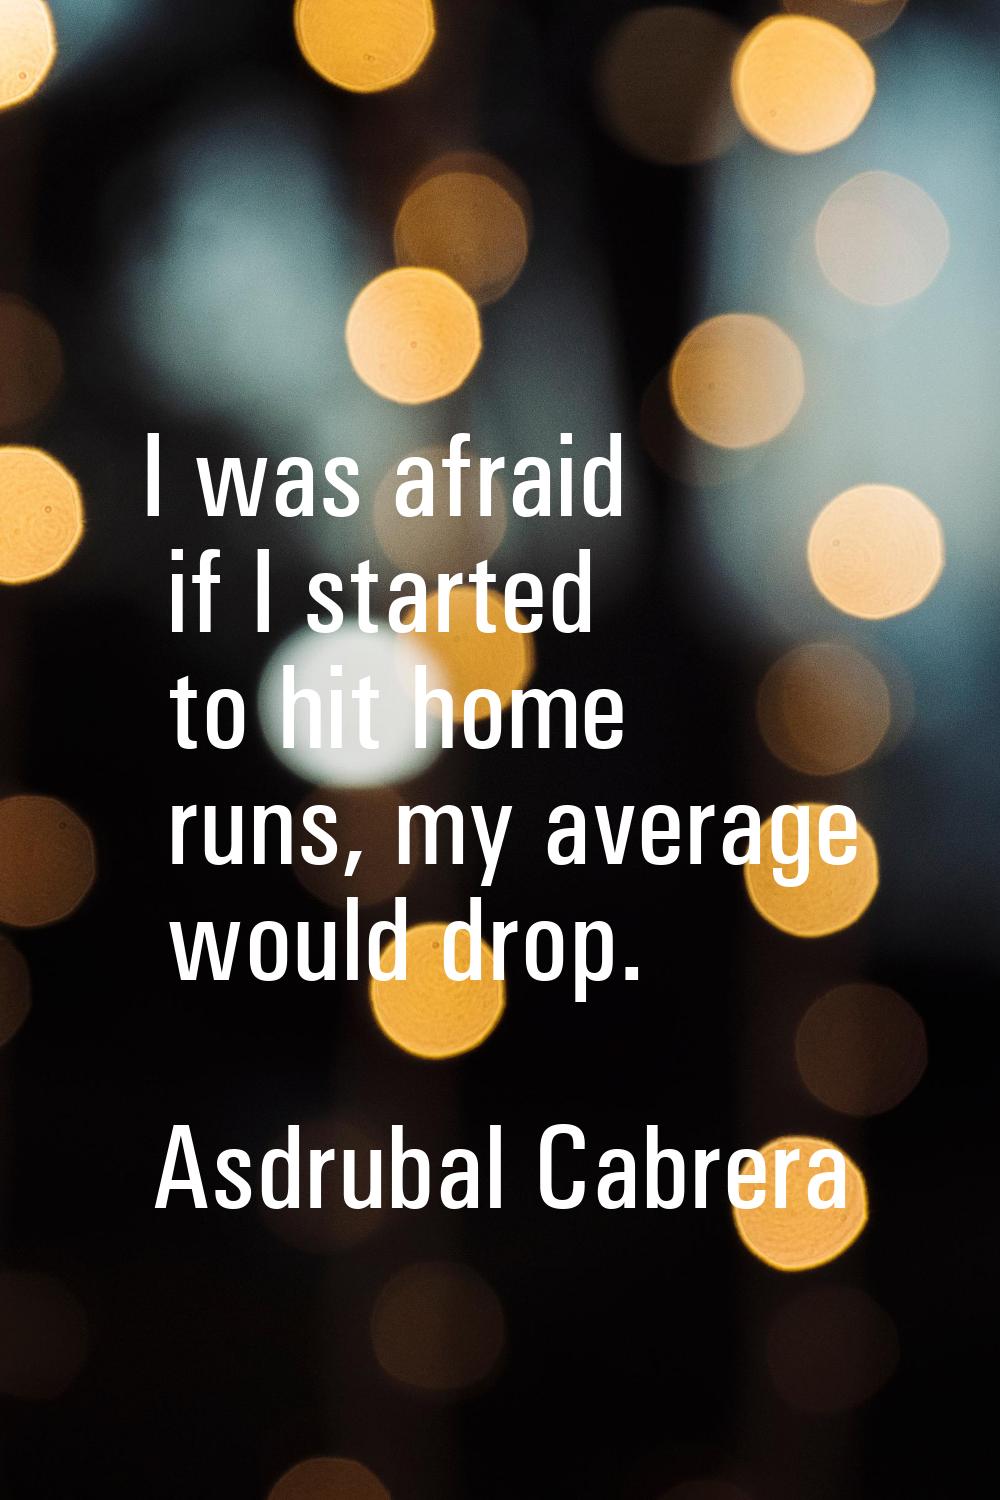 I was afraid if I started to hit home runs, my average would drop.